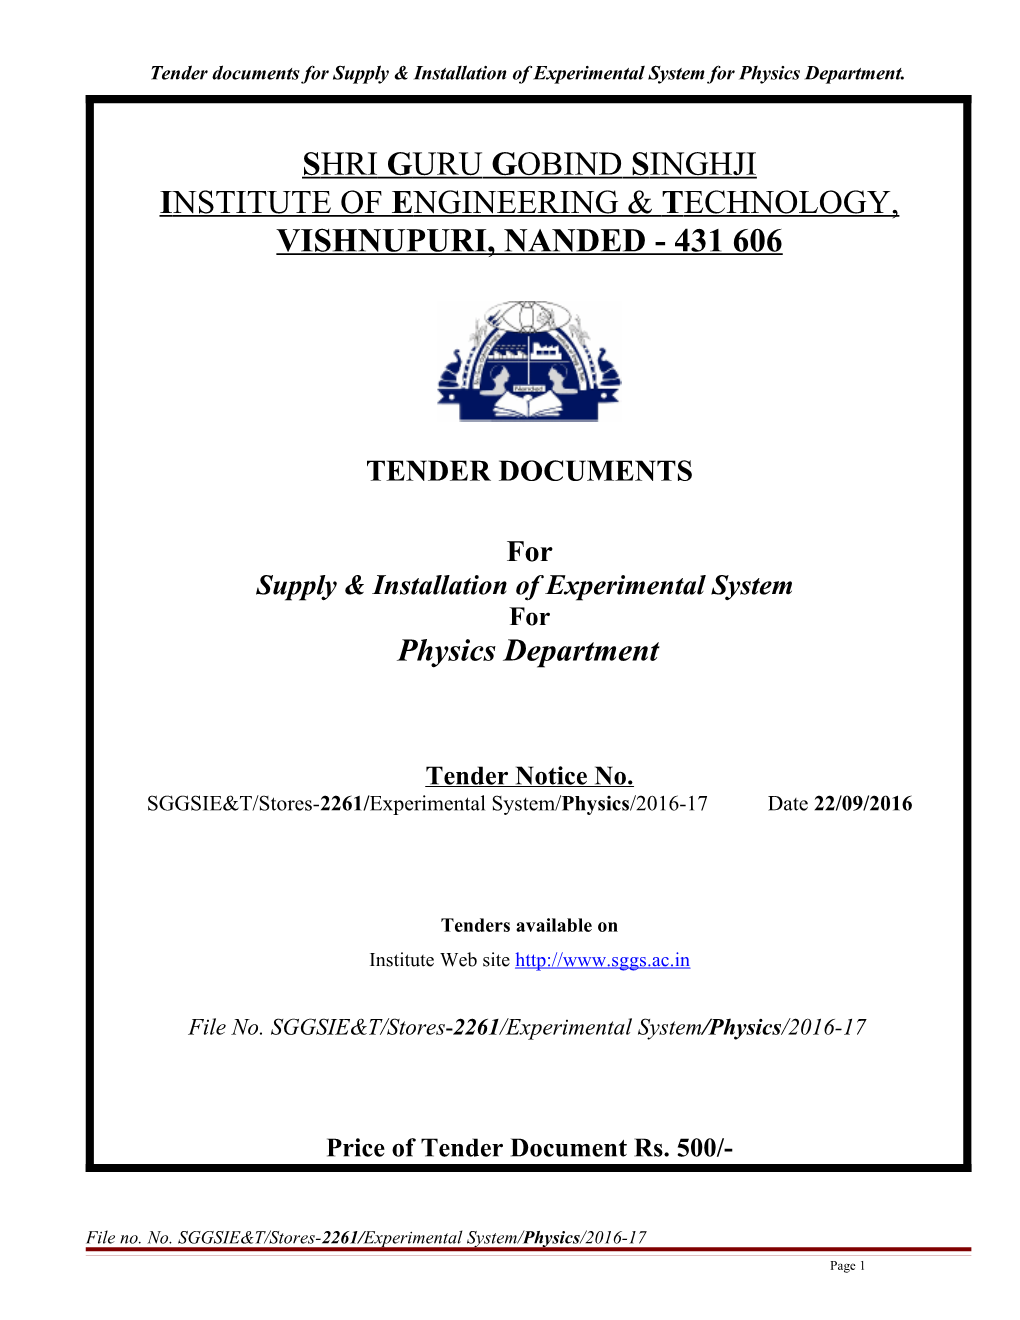 Tender Documents for Supply & Installation of Experimental System for Physics Department